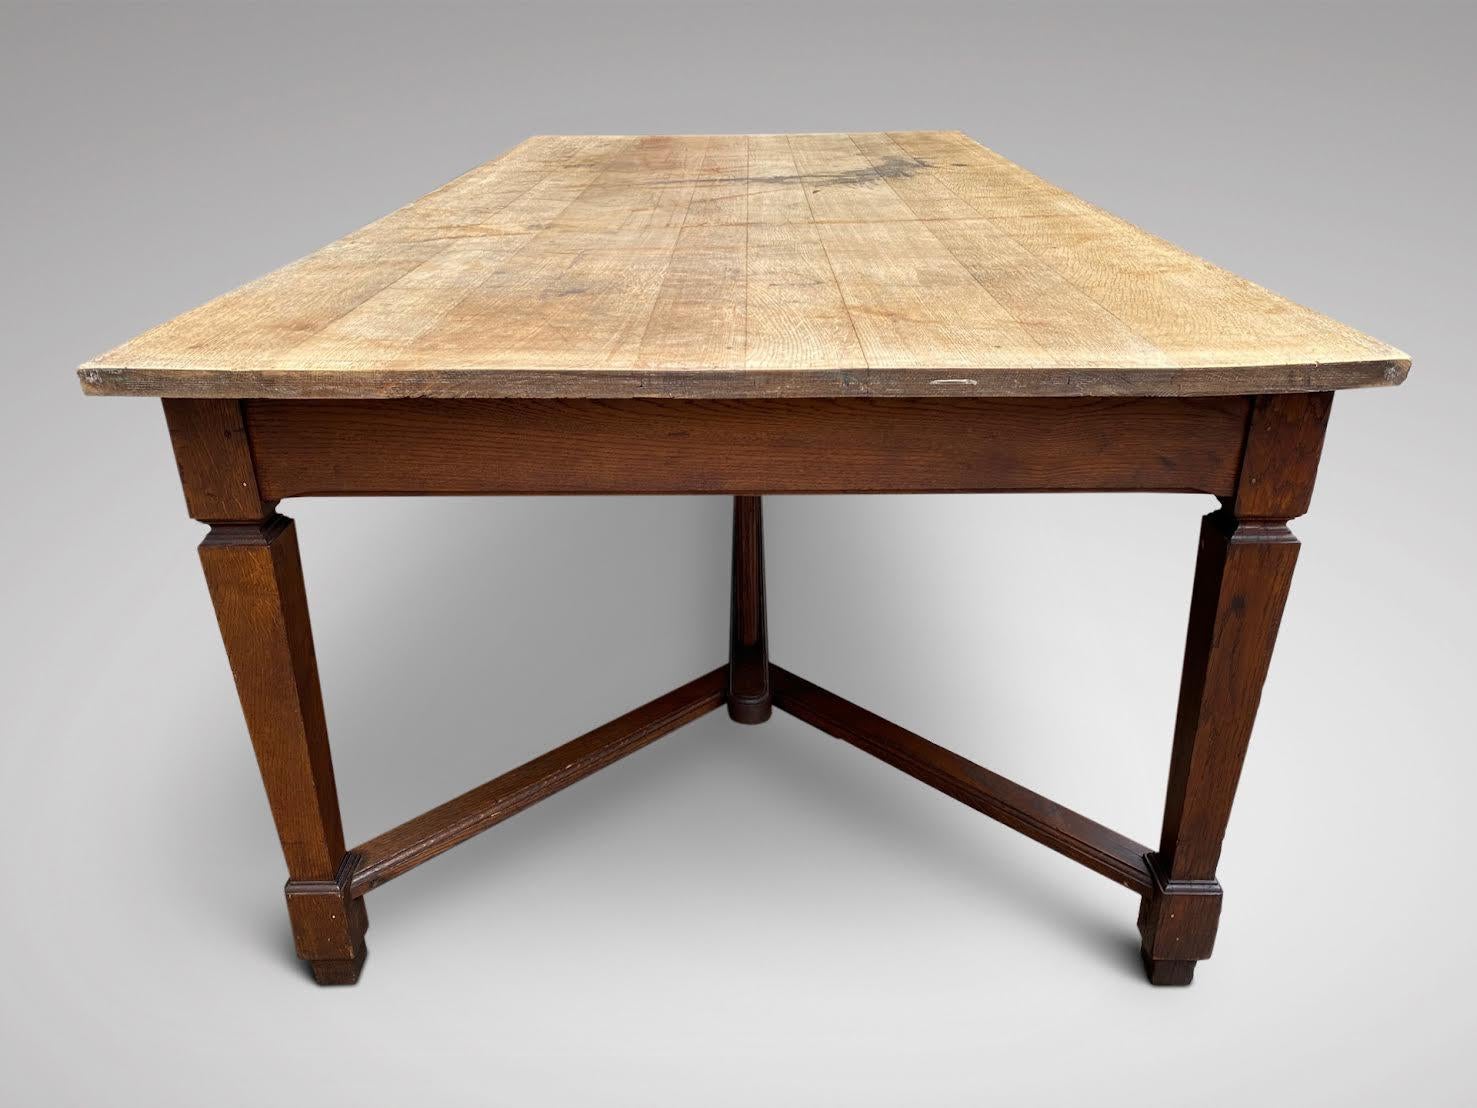 French Provincial 19th Century Stunning Hayrake Farmhouse Dining or Work Table in Solid Oak